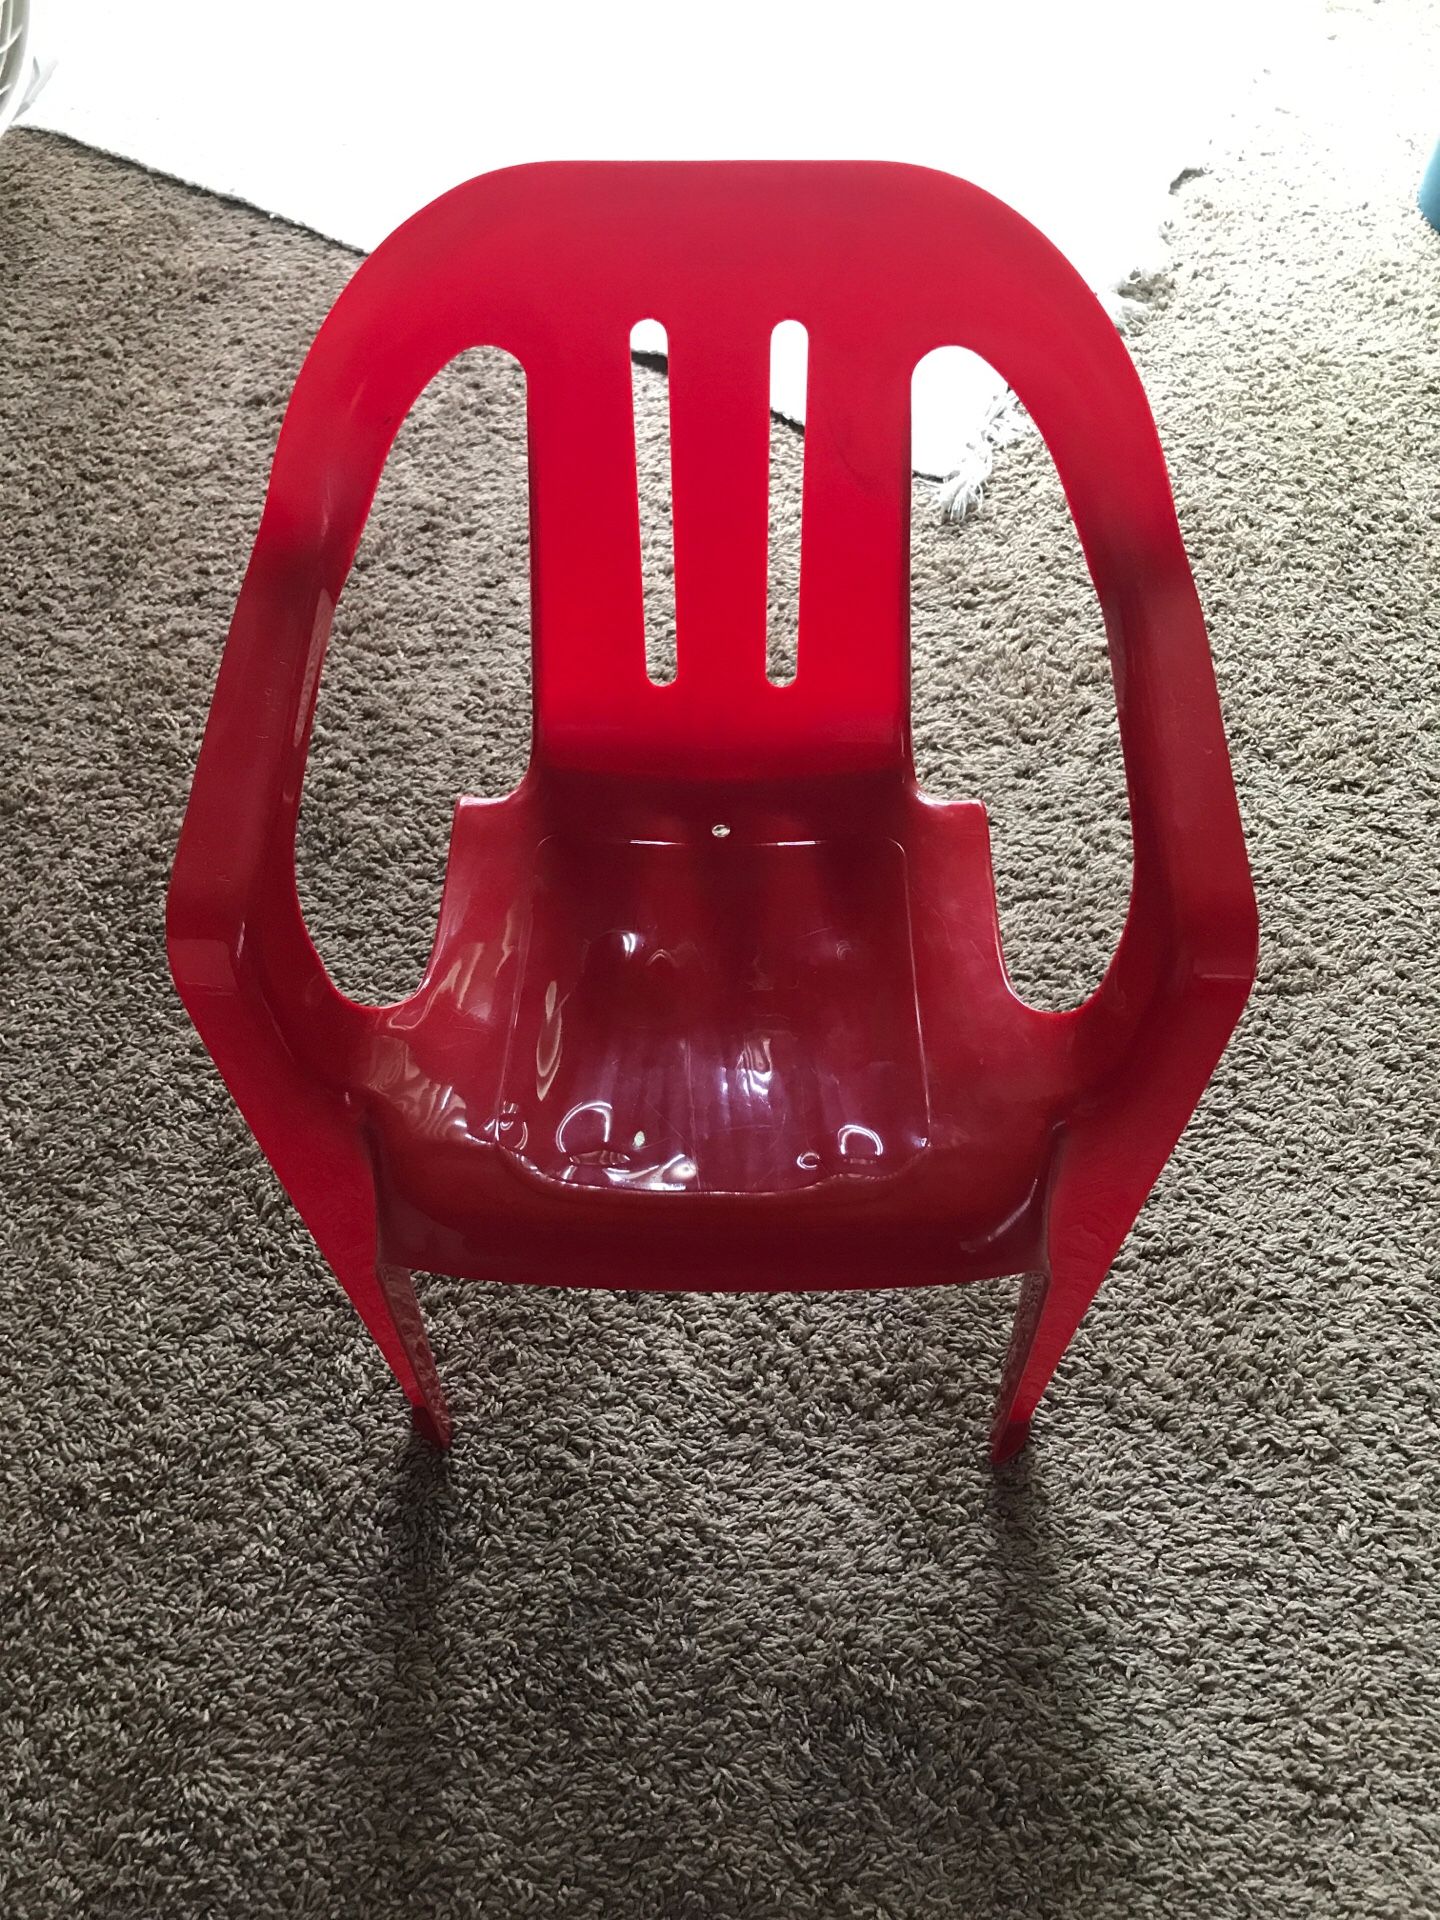 Kids plastic patio red chair